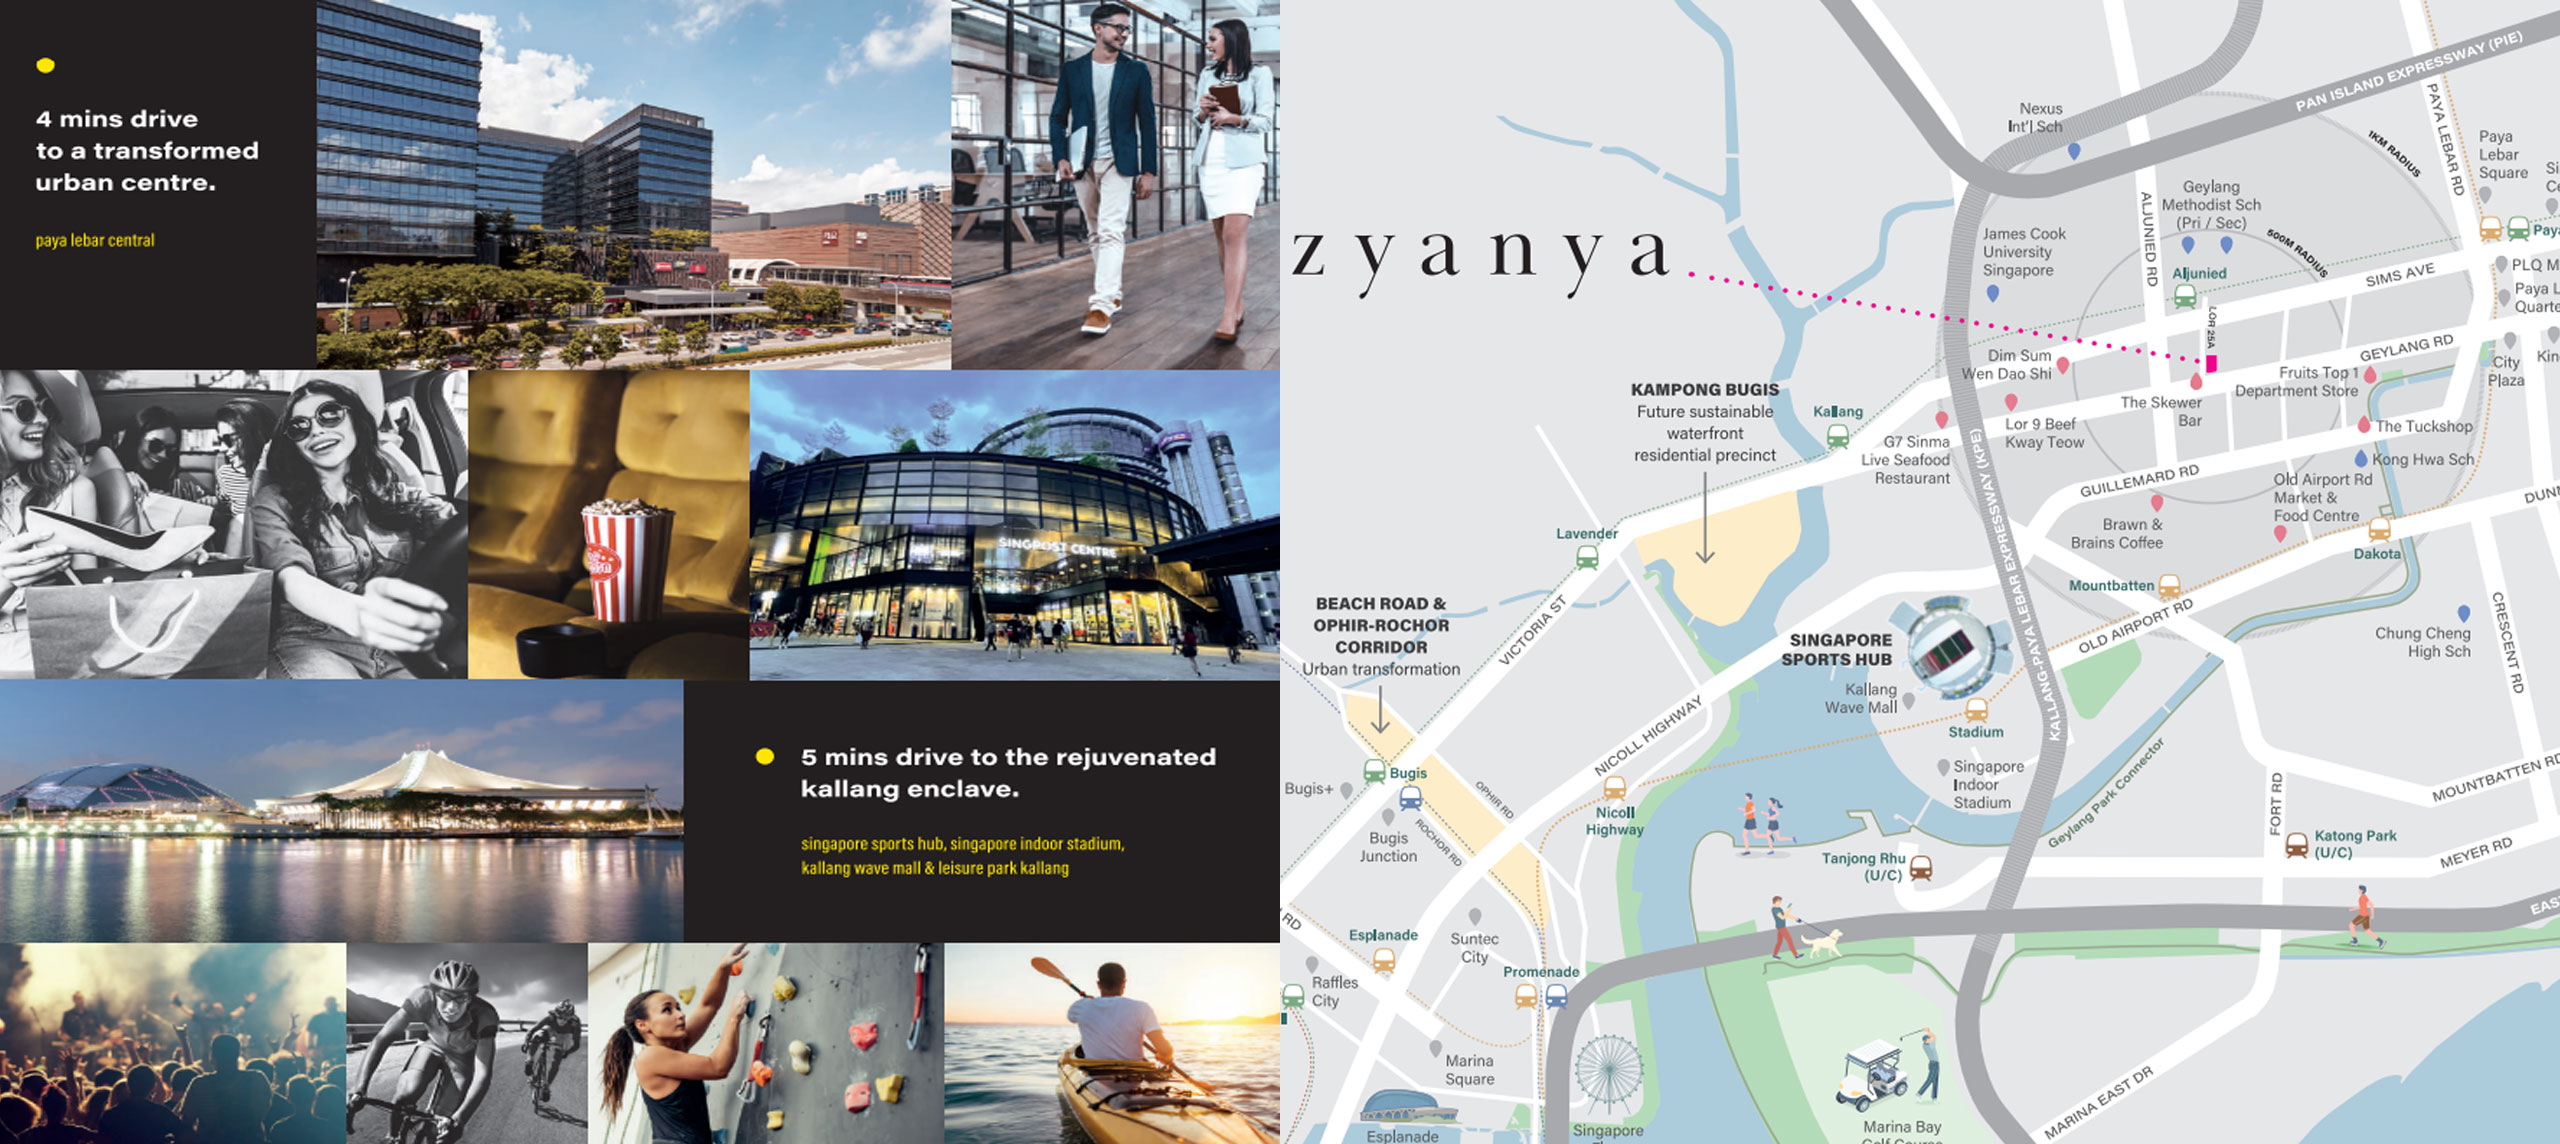 Zyanya is quickly access to Central Business District (CBD)